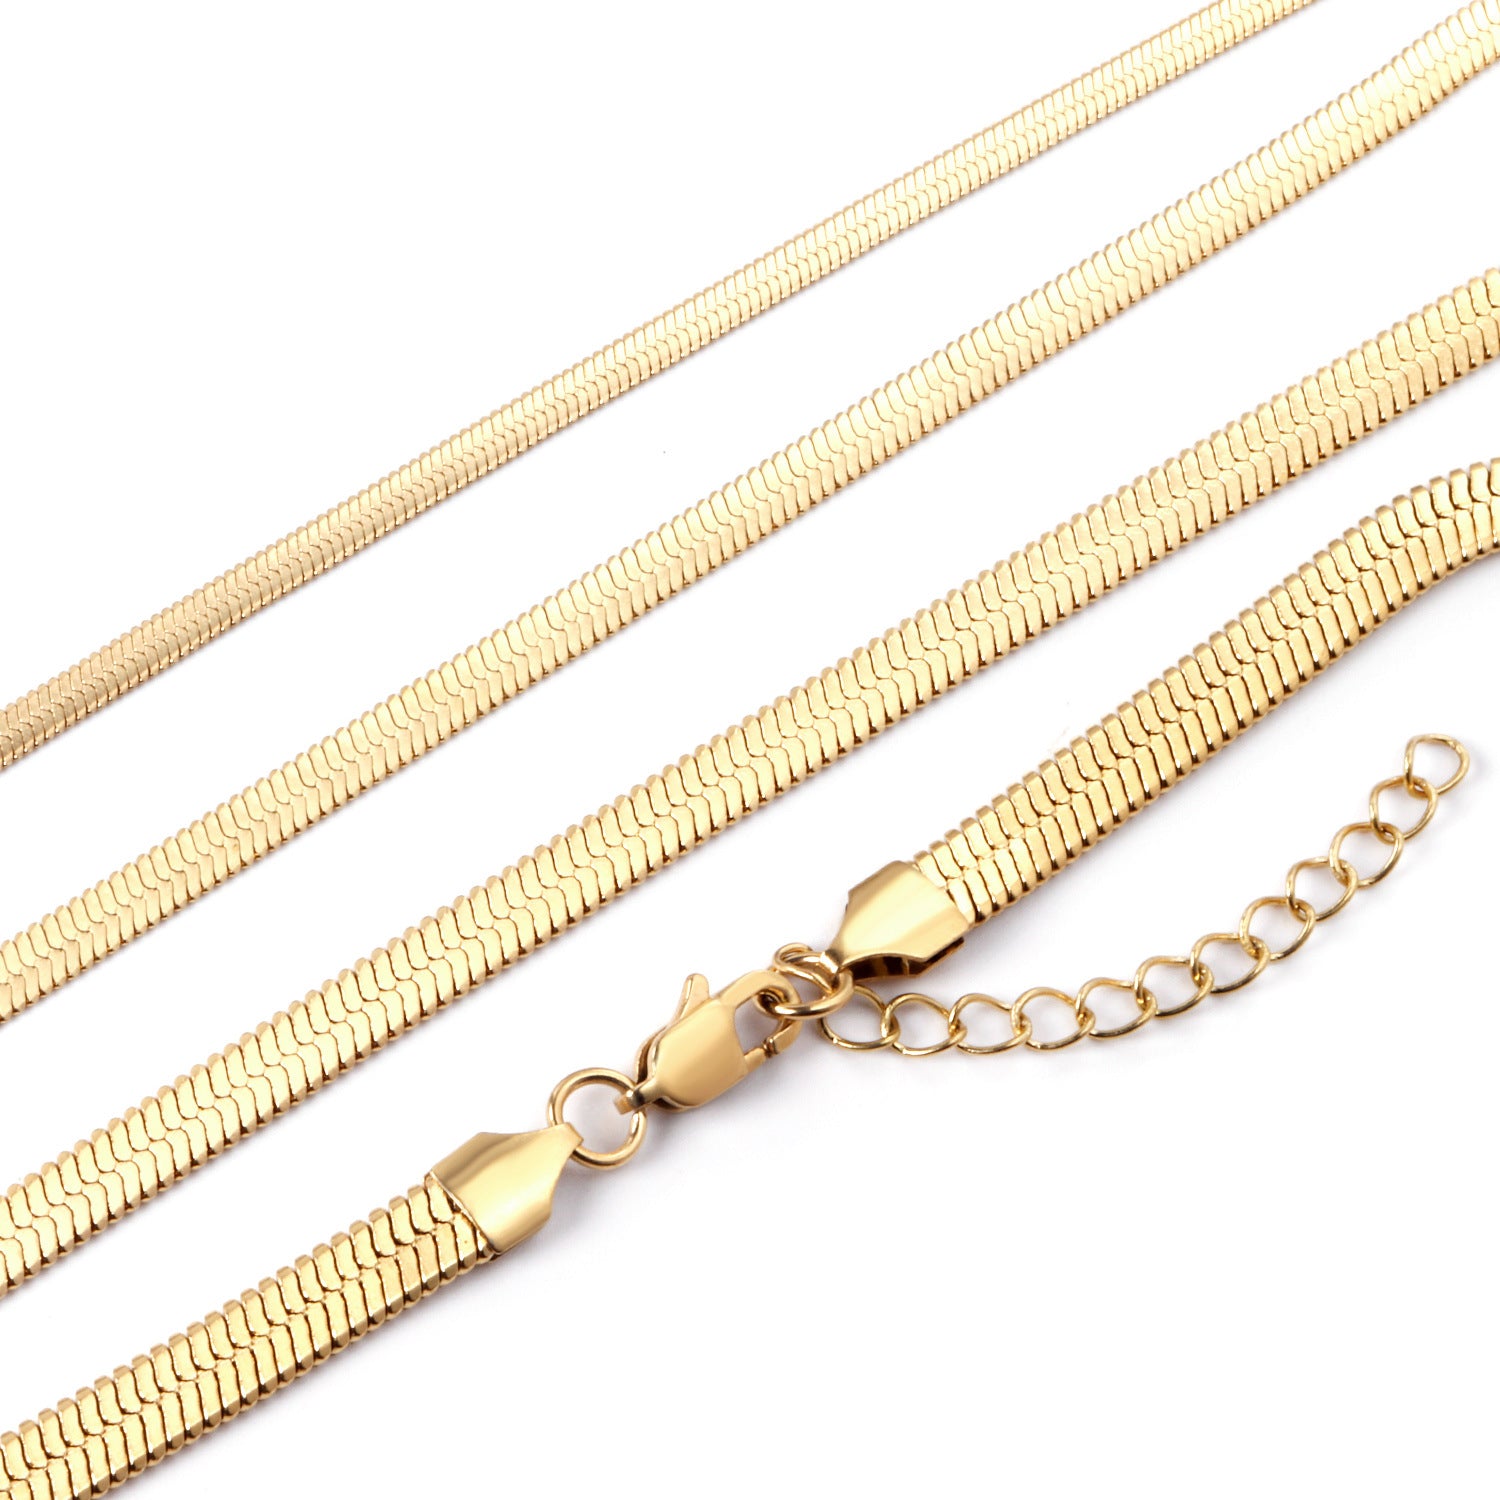 Stainless Steel Herringbone Chain Necklace Gold 3/4/5mm